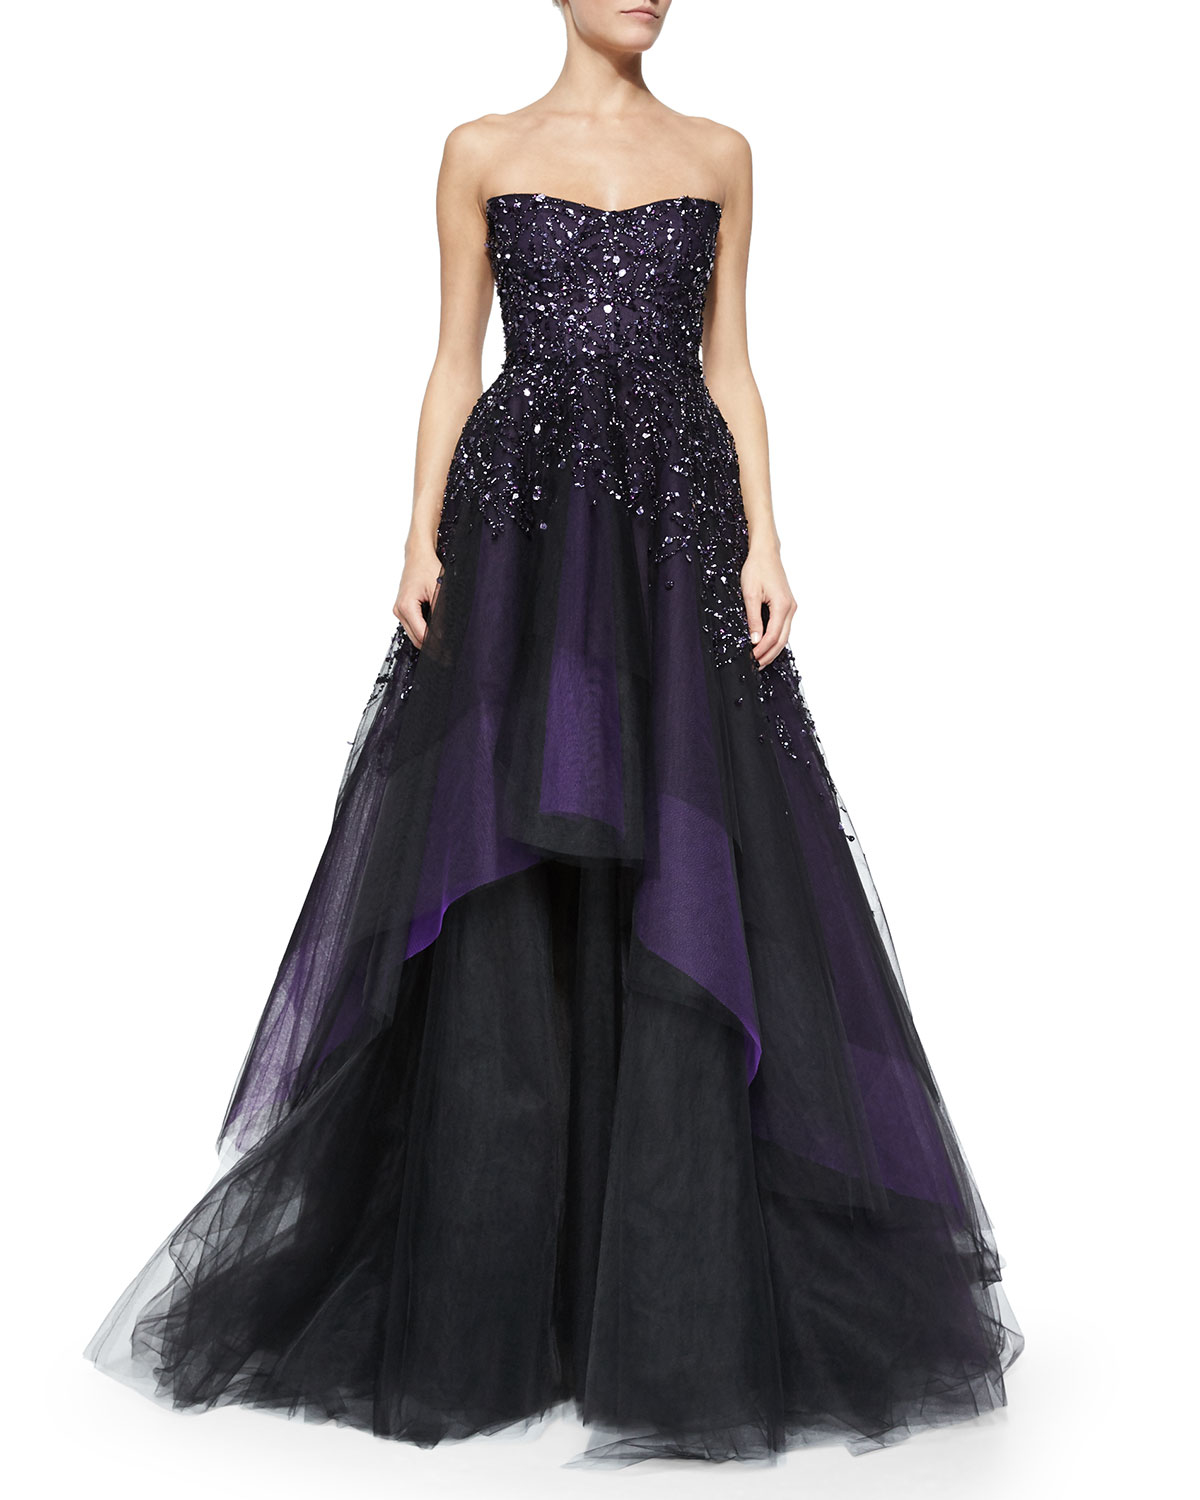 Monique lhuillier Strapless Degrade Embroidered Ball Gown in Purple | Lyst